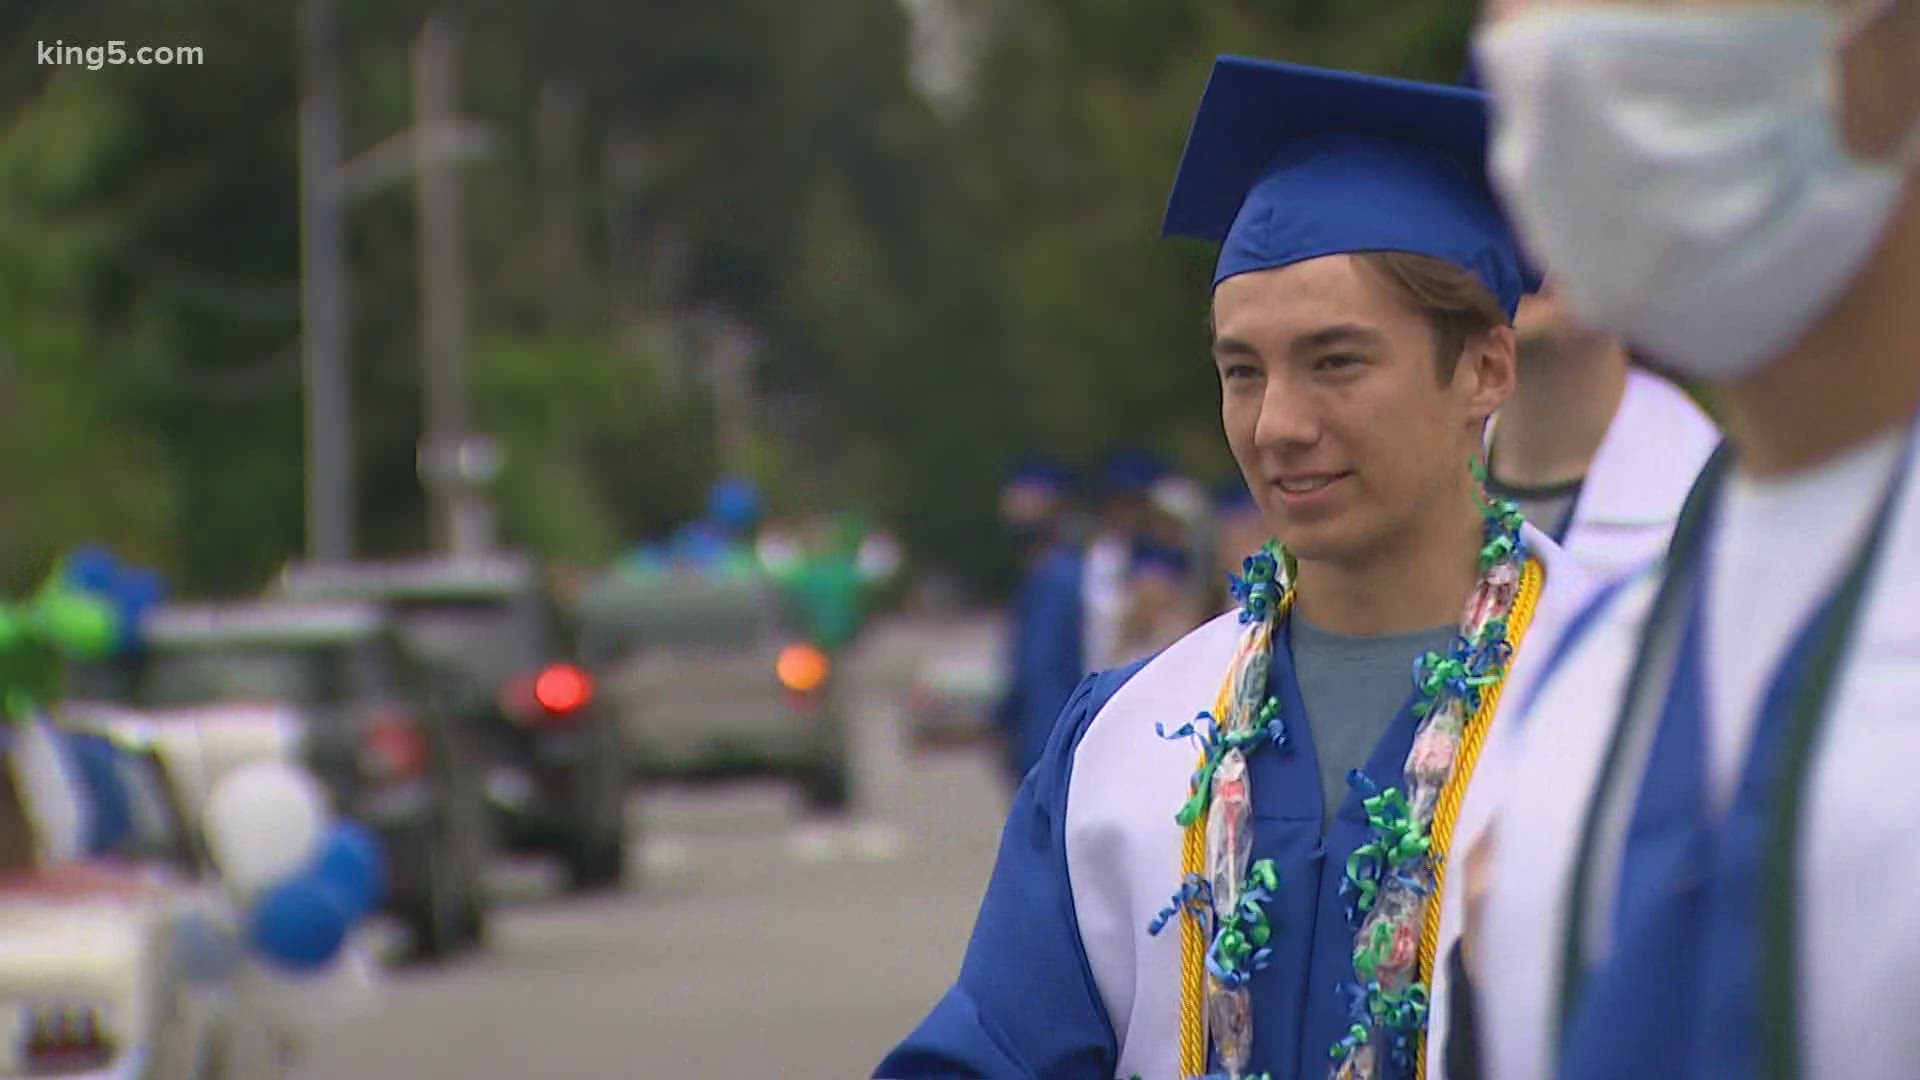 Shorewood High School seniors wore their caps and gowns for a socially distant ceremony to mark the end of high school